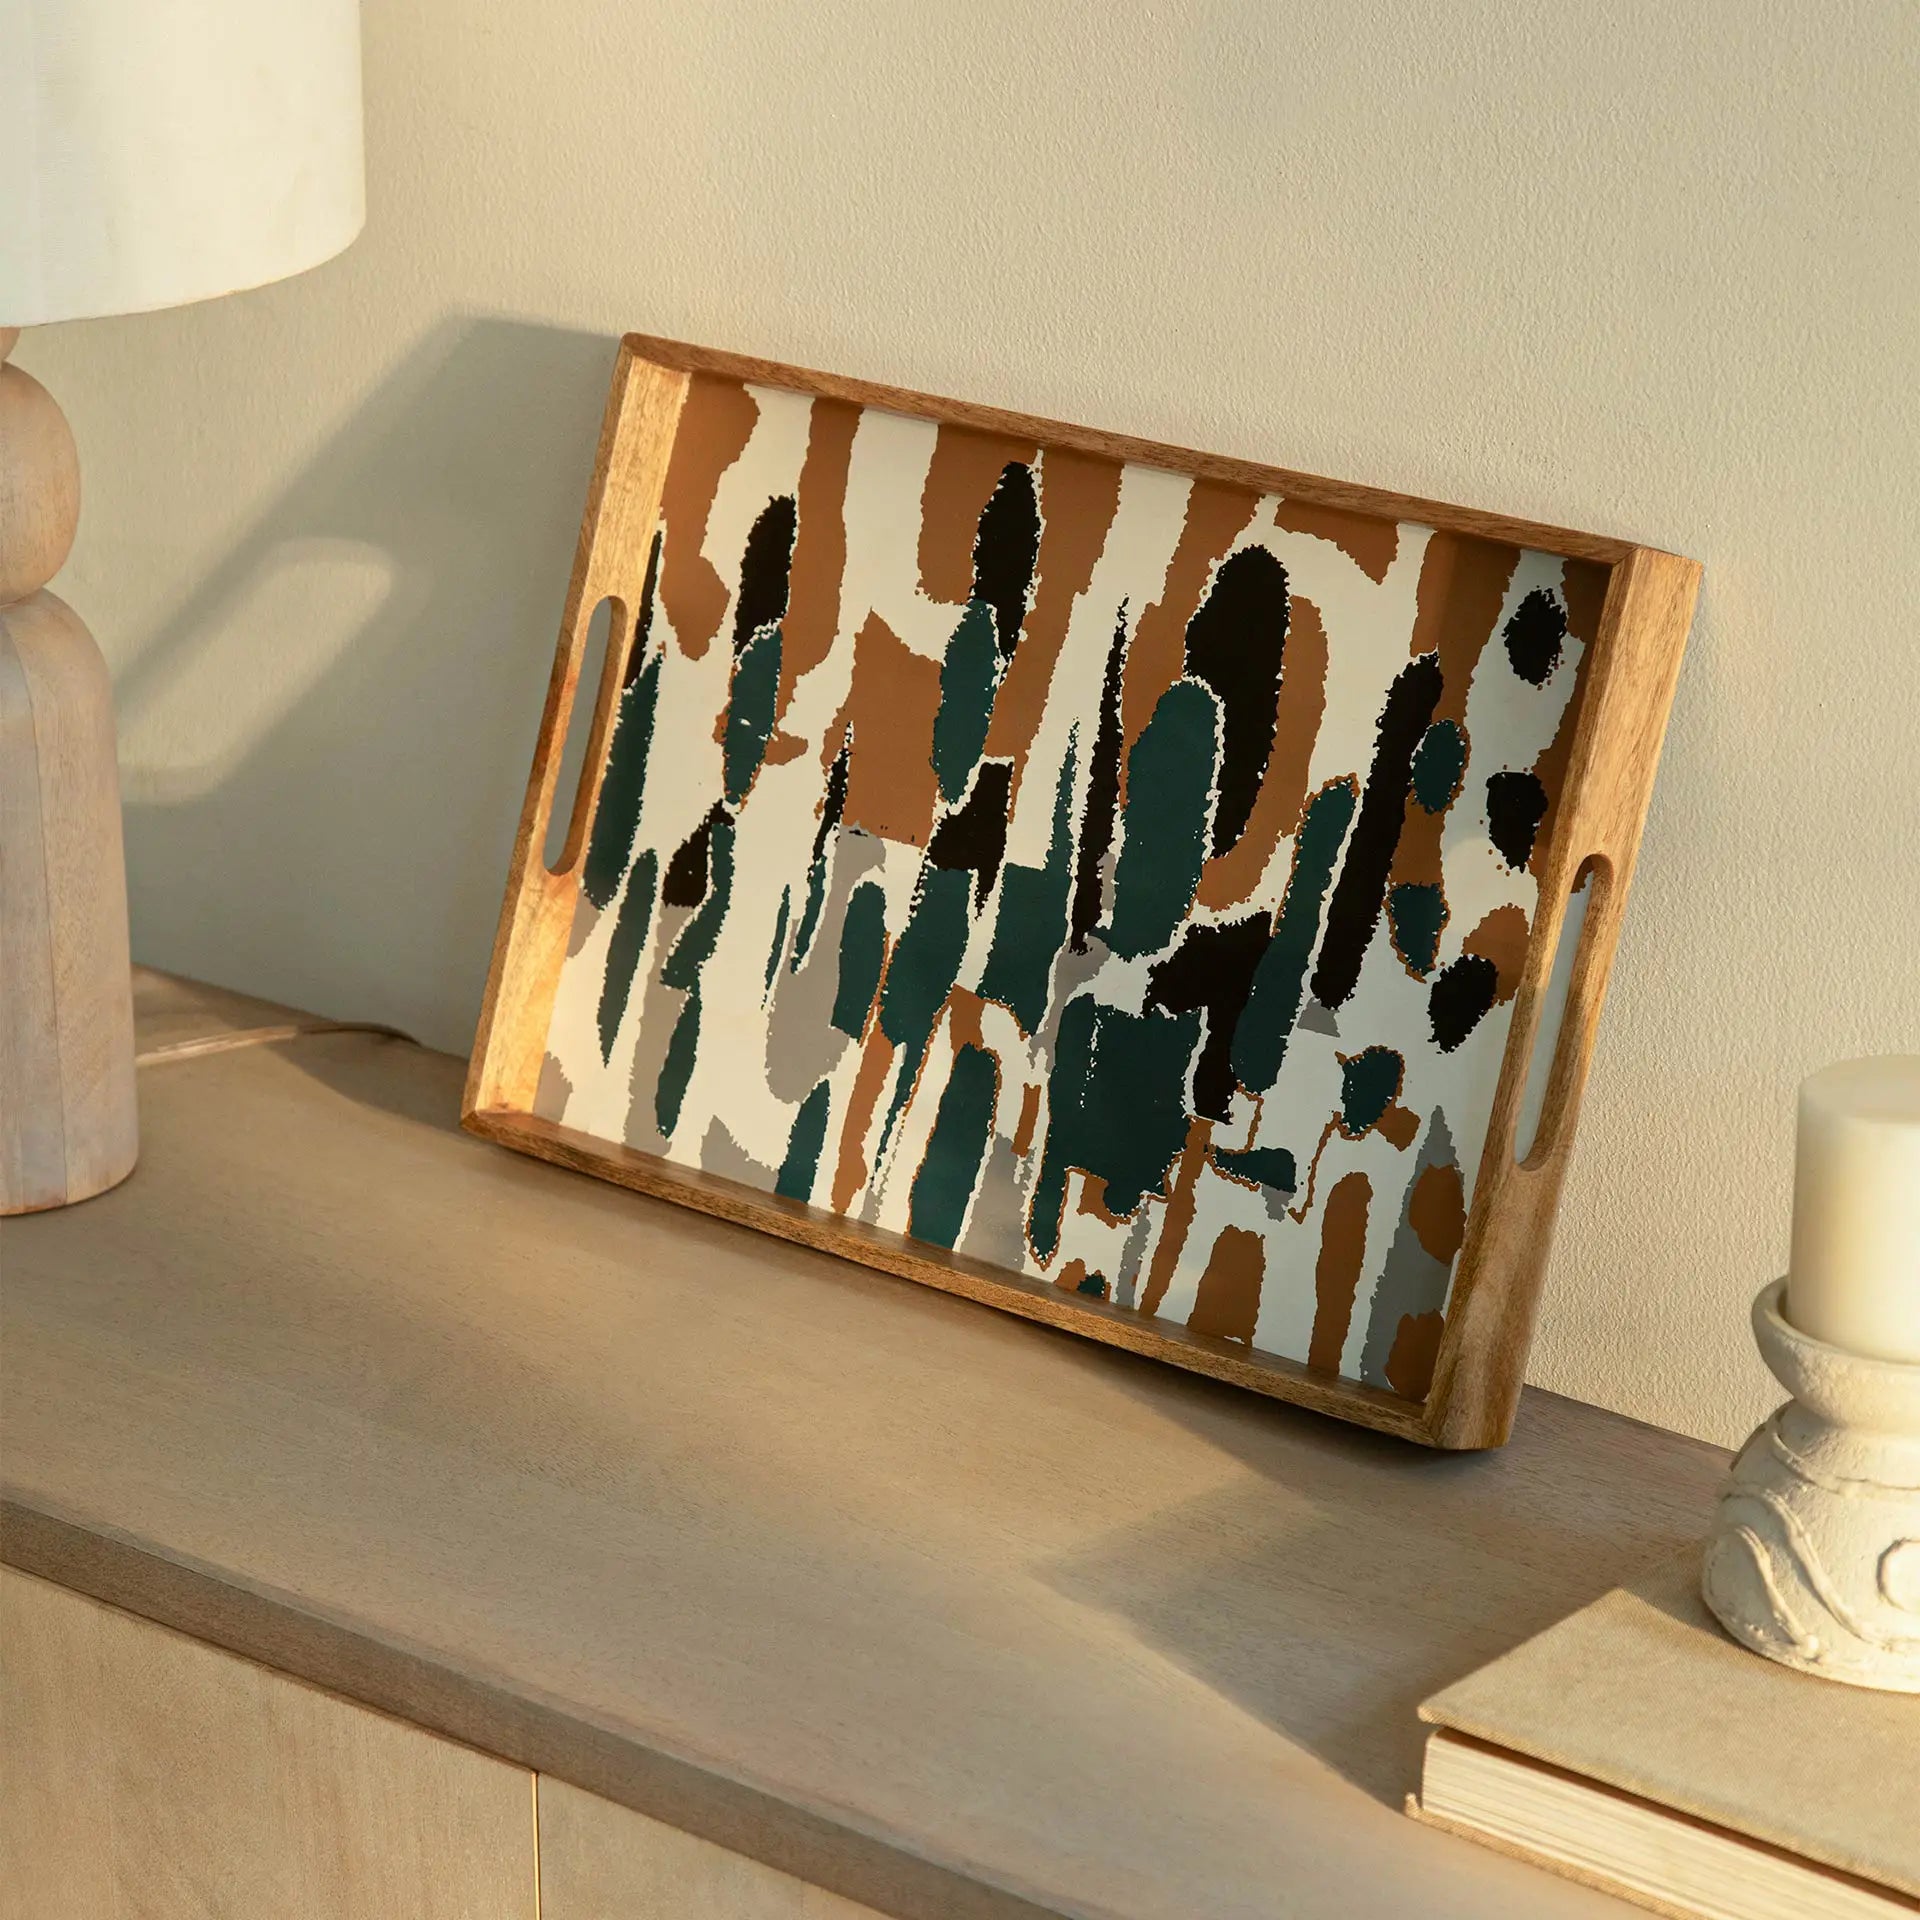 Wooden Multicolour Abstract Tray